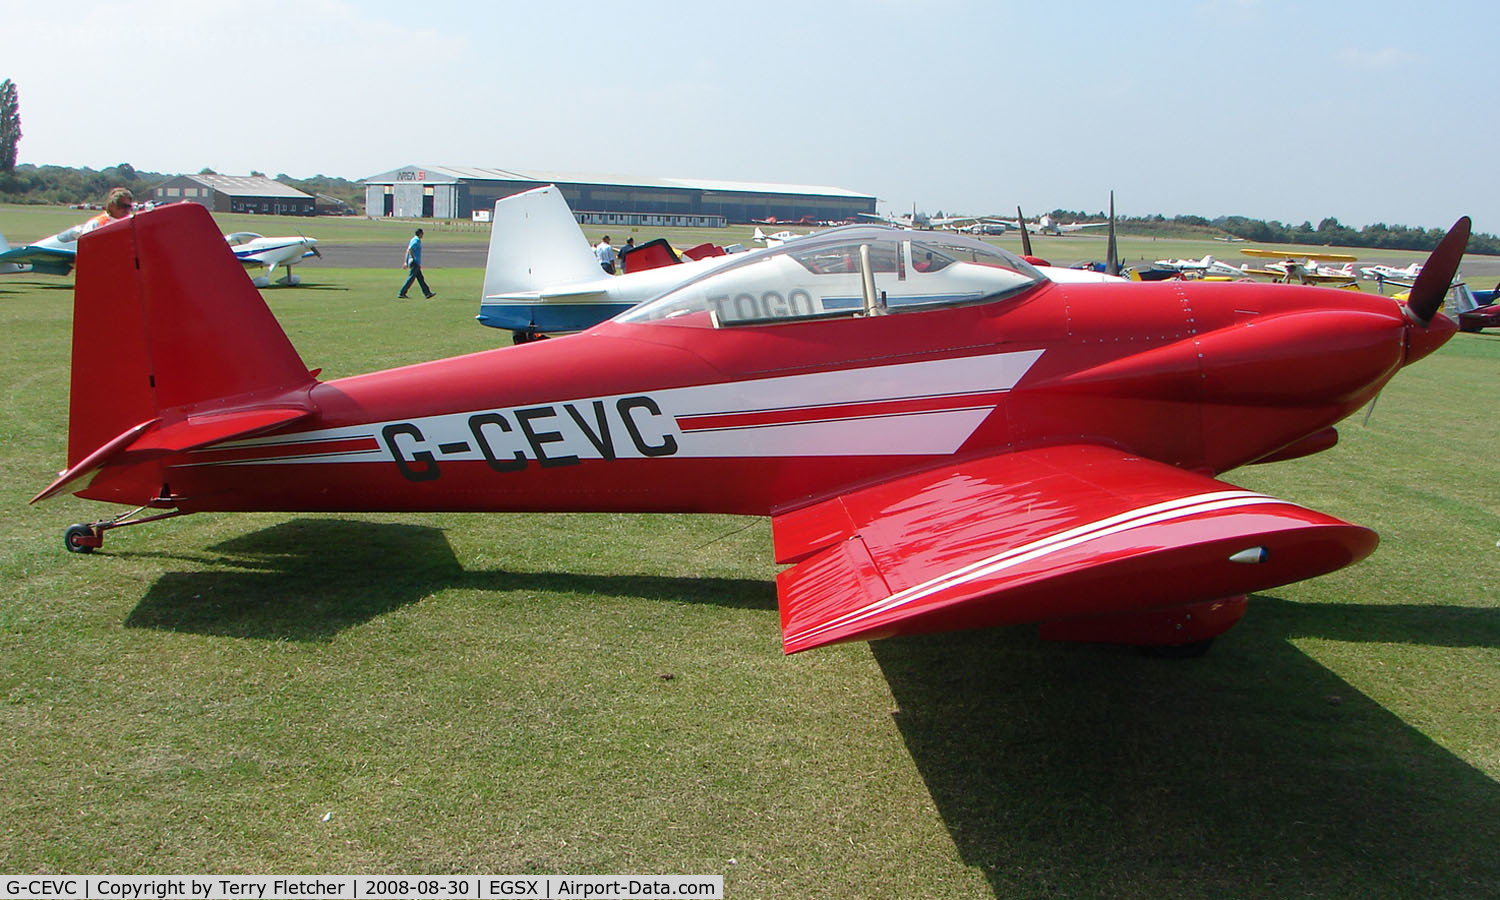 G-CEVC, 2007 Vans RV-4 C/N 2726, Participant in the 2008 RV Fly-in at North Weald Uk